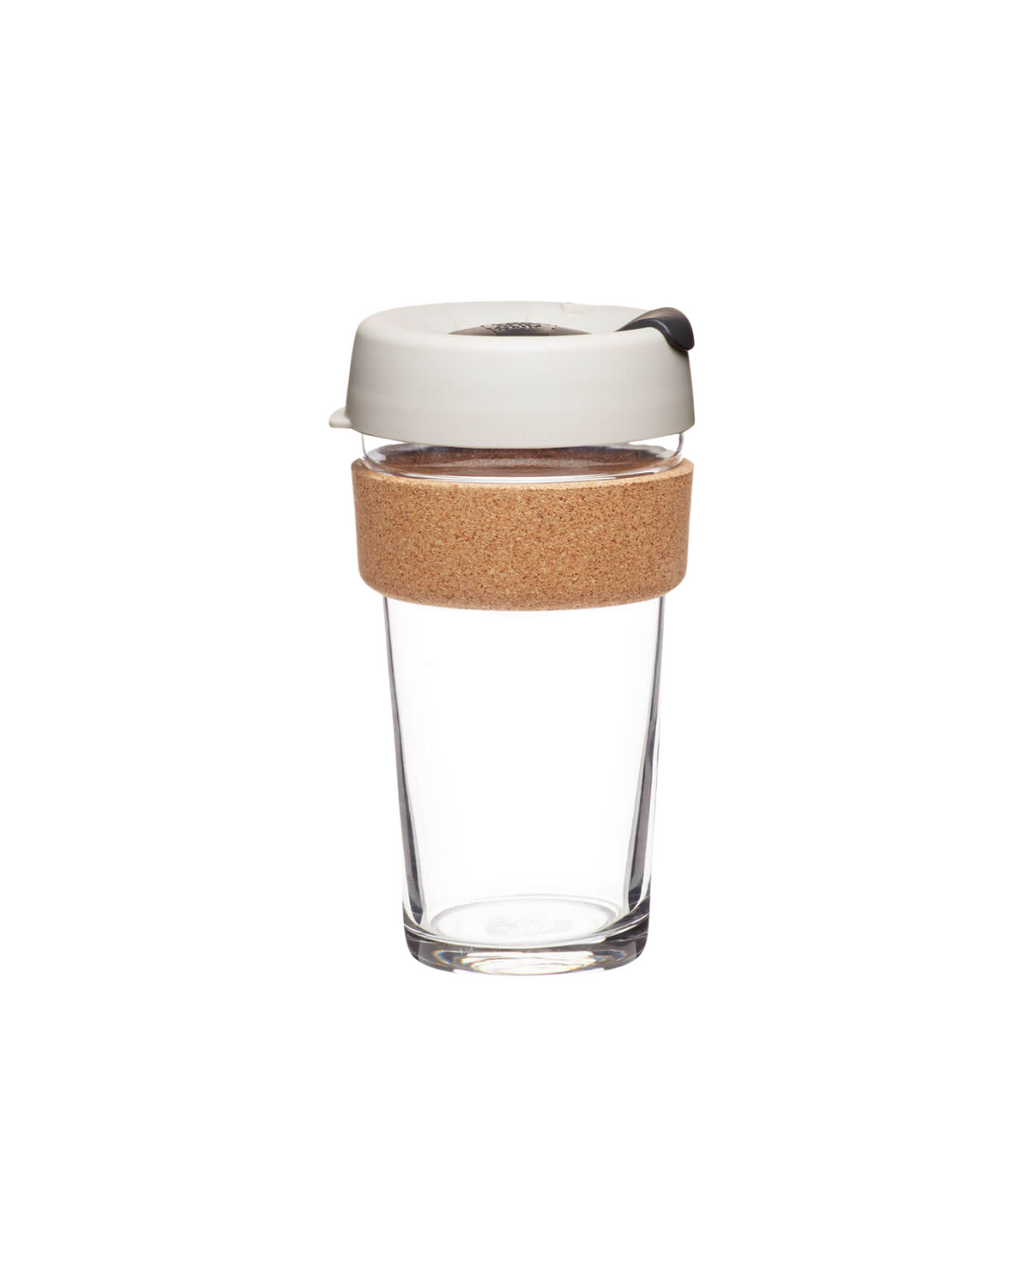 1pc 700ml/24oz Thickened Clear Glass Cup With Wooden Lid And Stainless  Steel Straw, Coffee Cup For Outdoor Sports, Picnic, Camping